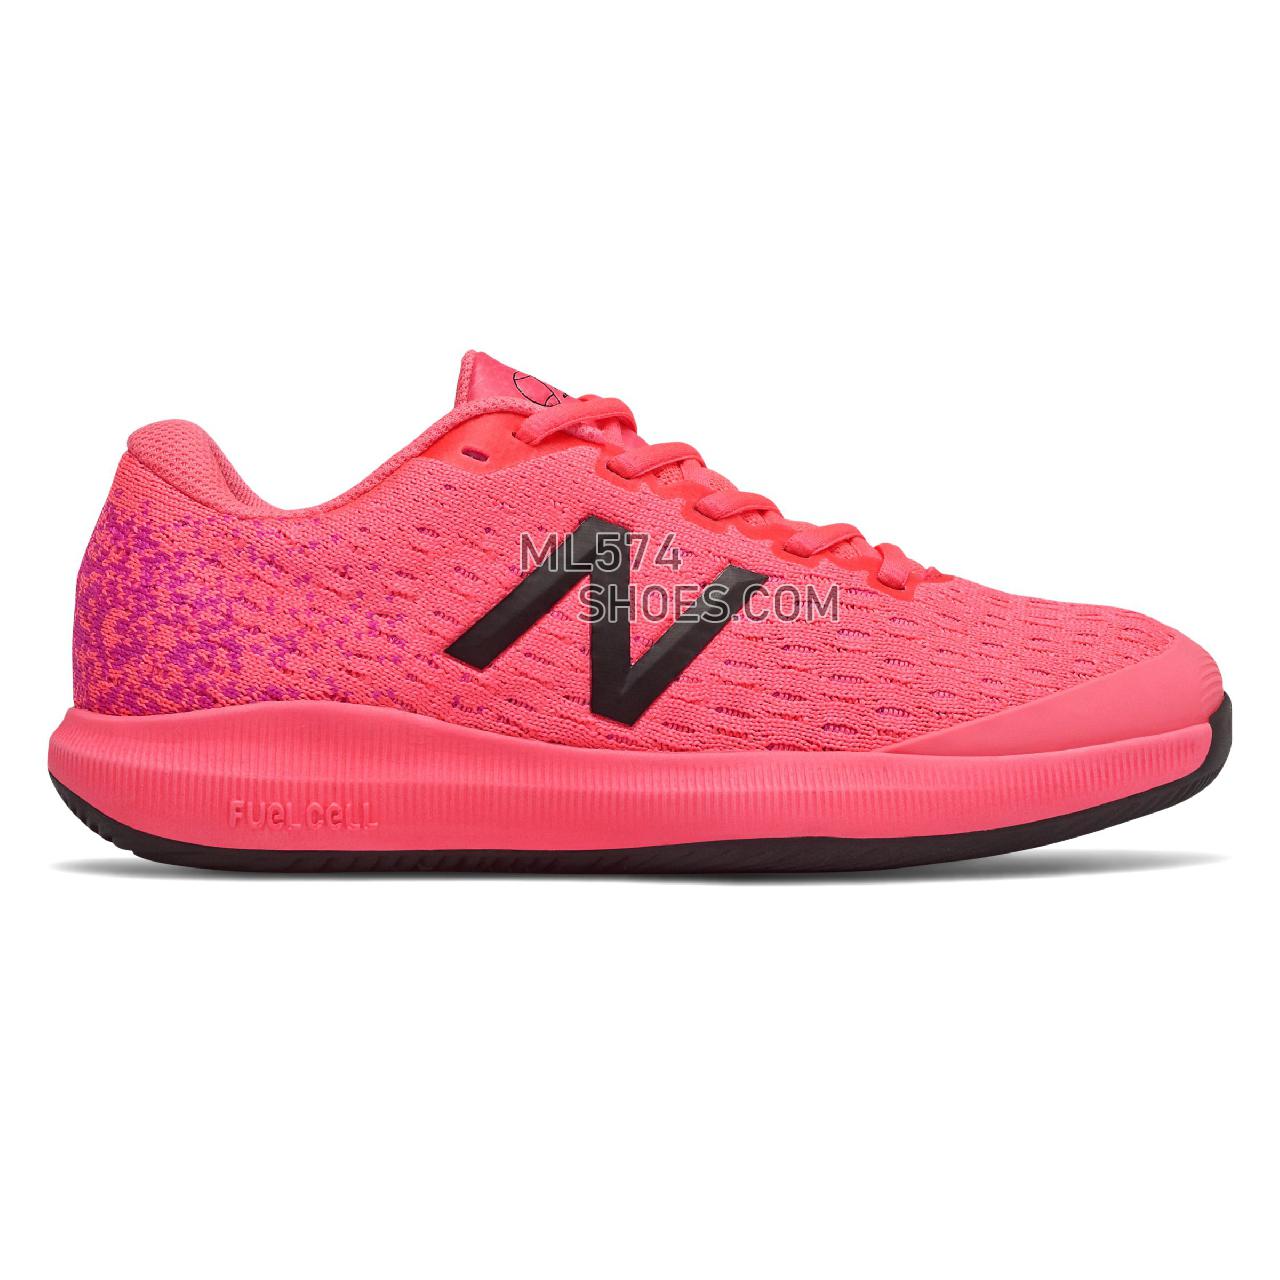 New Balance FuelCell 996v4 - Women's Tennis - Guava with Black - WCH996G4